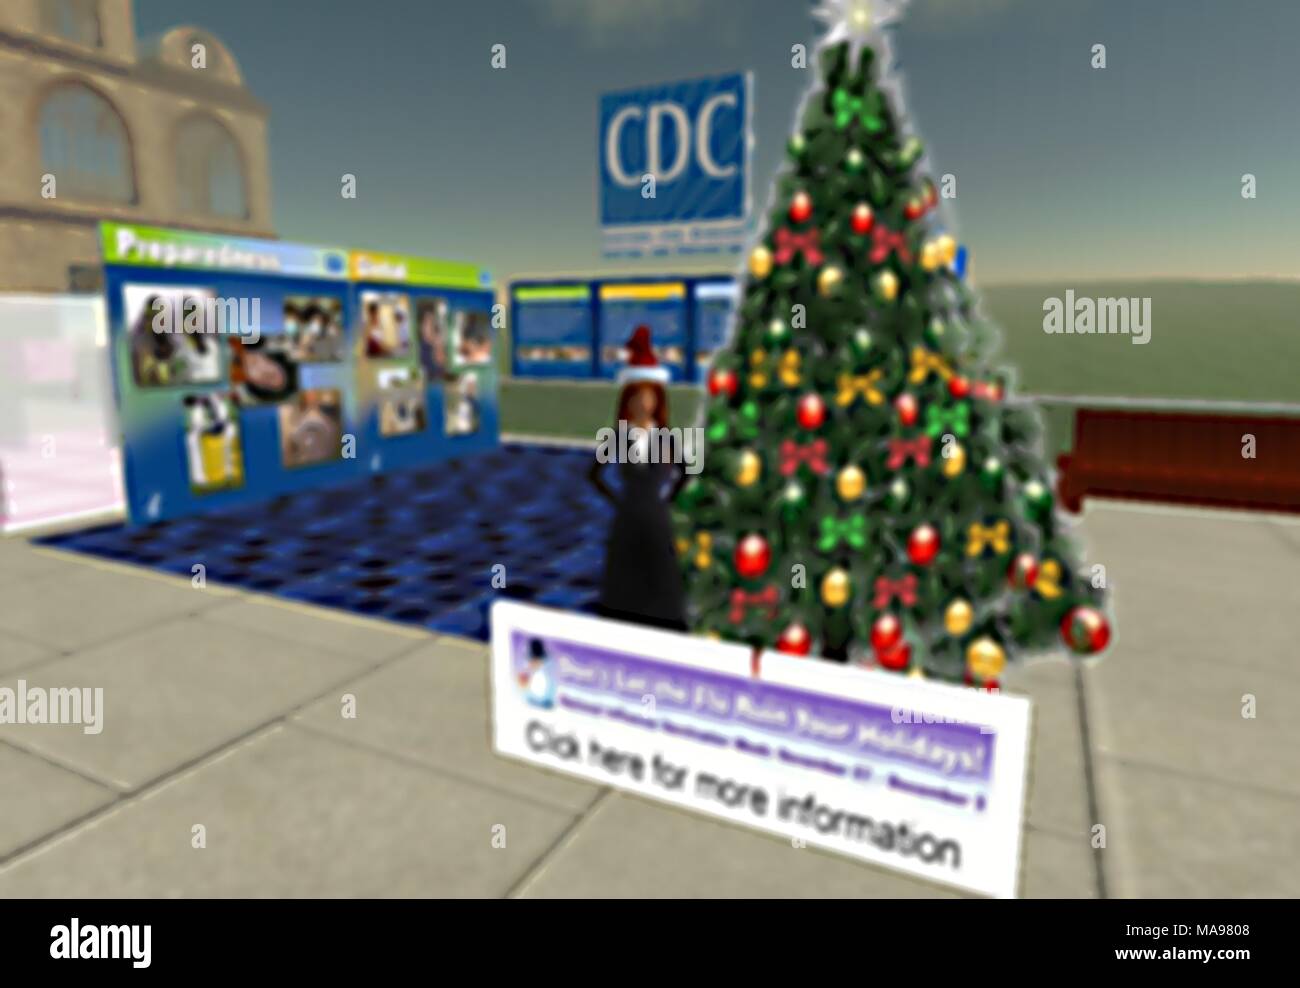 Image of the CDC's avatar Hygeia Philo standing next to a Christmas Tree among informative interactive billboards, at the CDC facility in the 3d virtual world Second Life, August, 2006. Image courtesy CDC/John P. Anderton. () Stock Photo